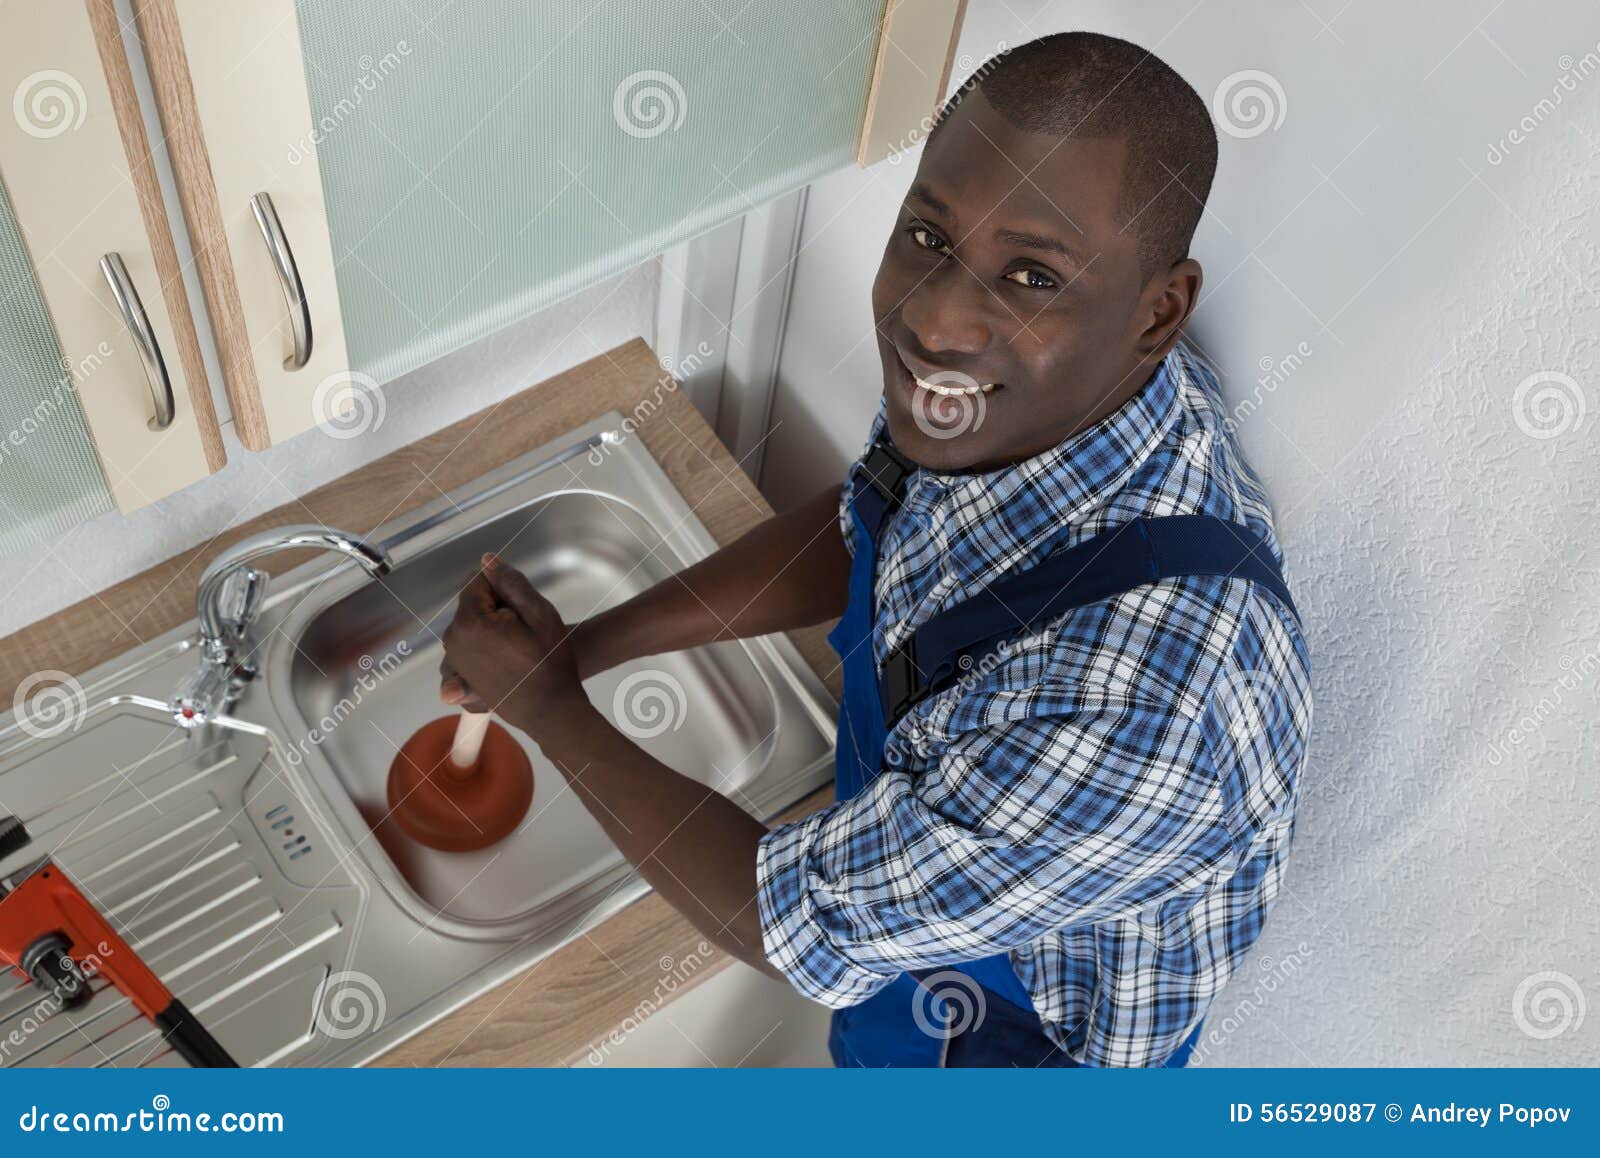 can you use a plunger on a kitchen sink